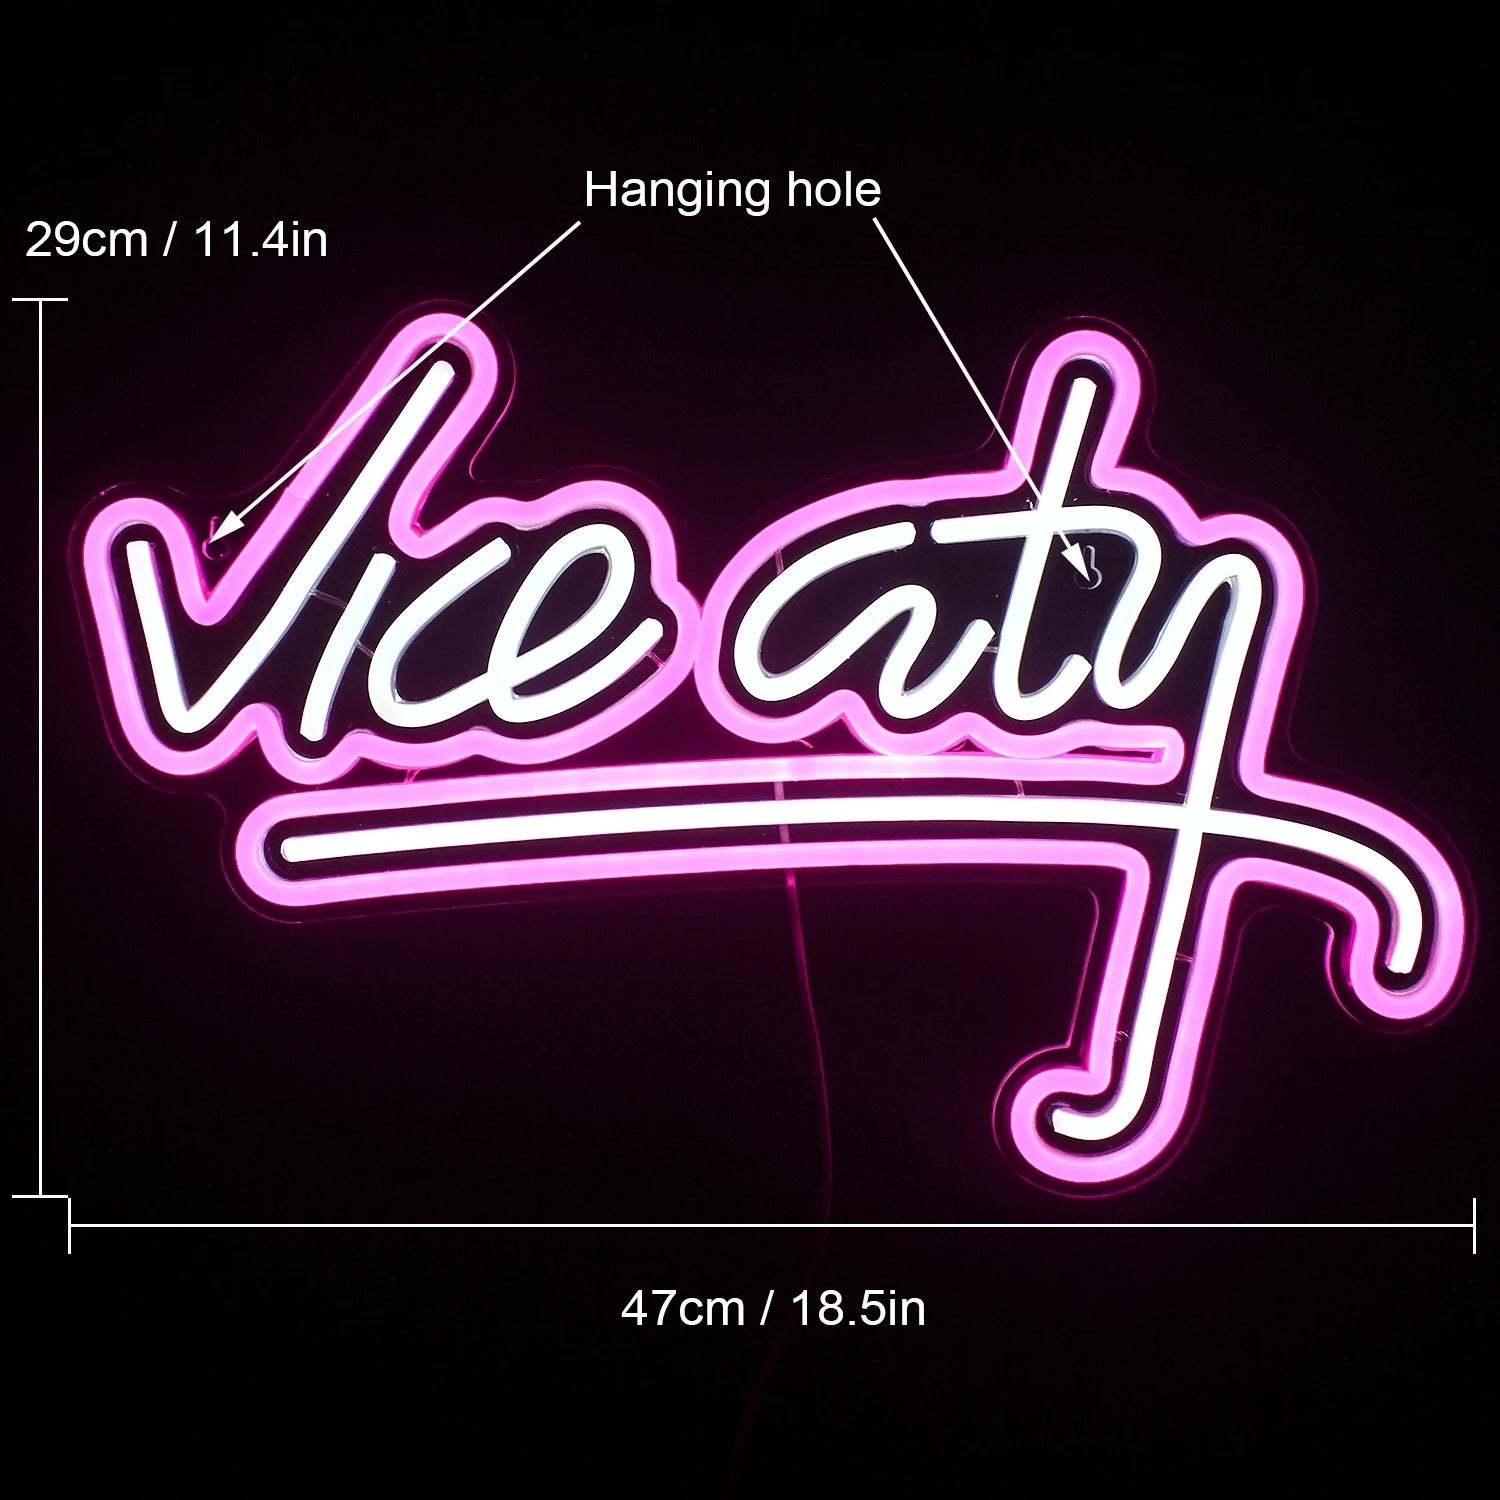 Vice City Neon Sign